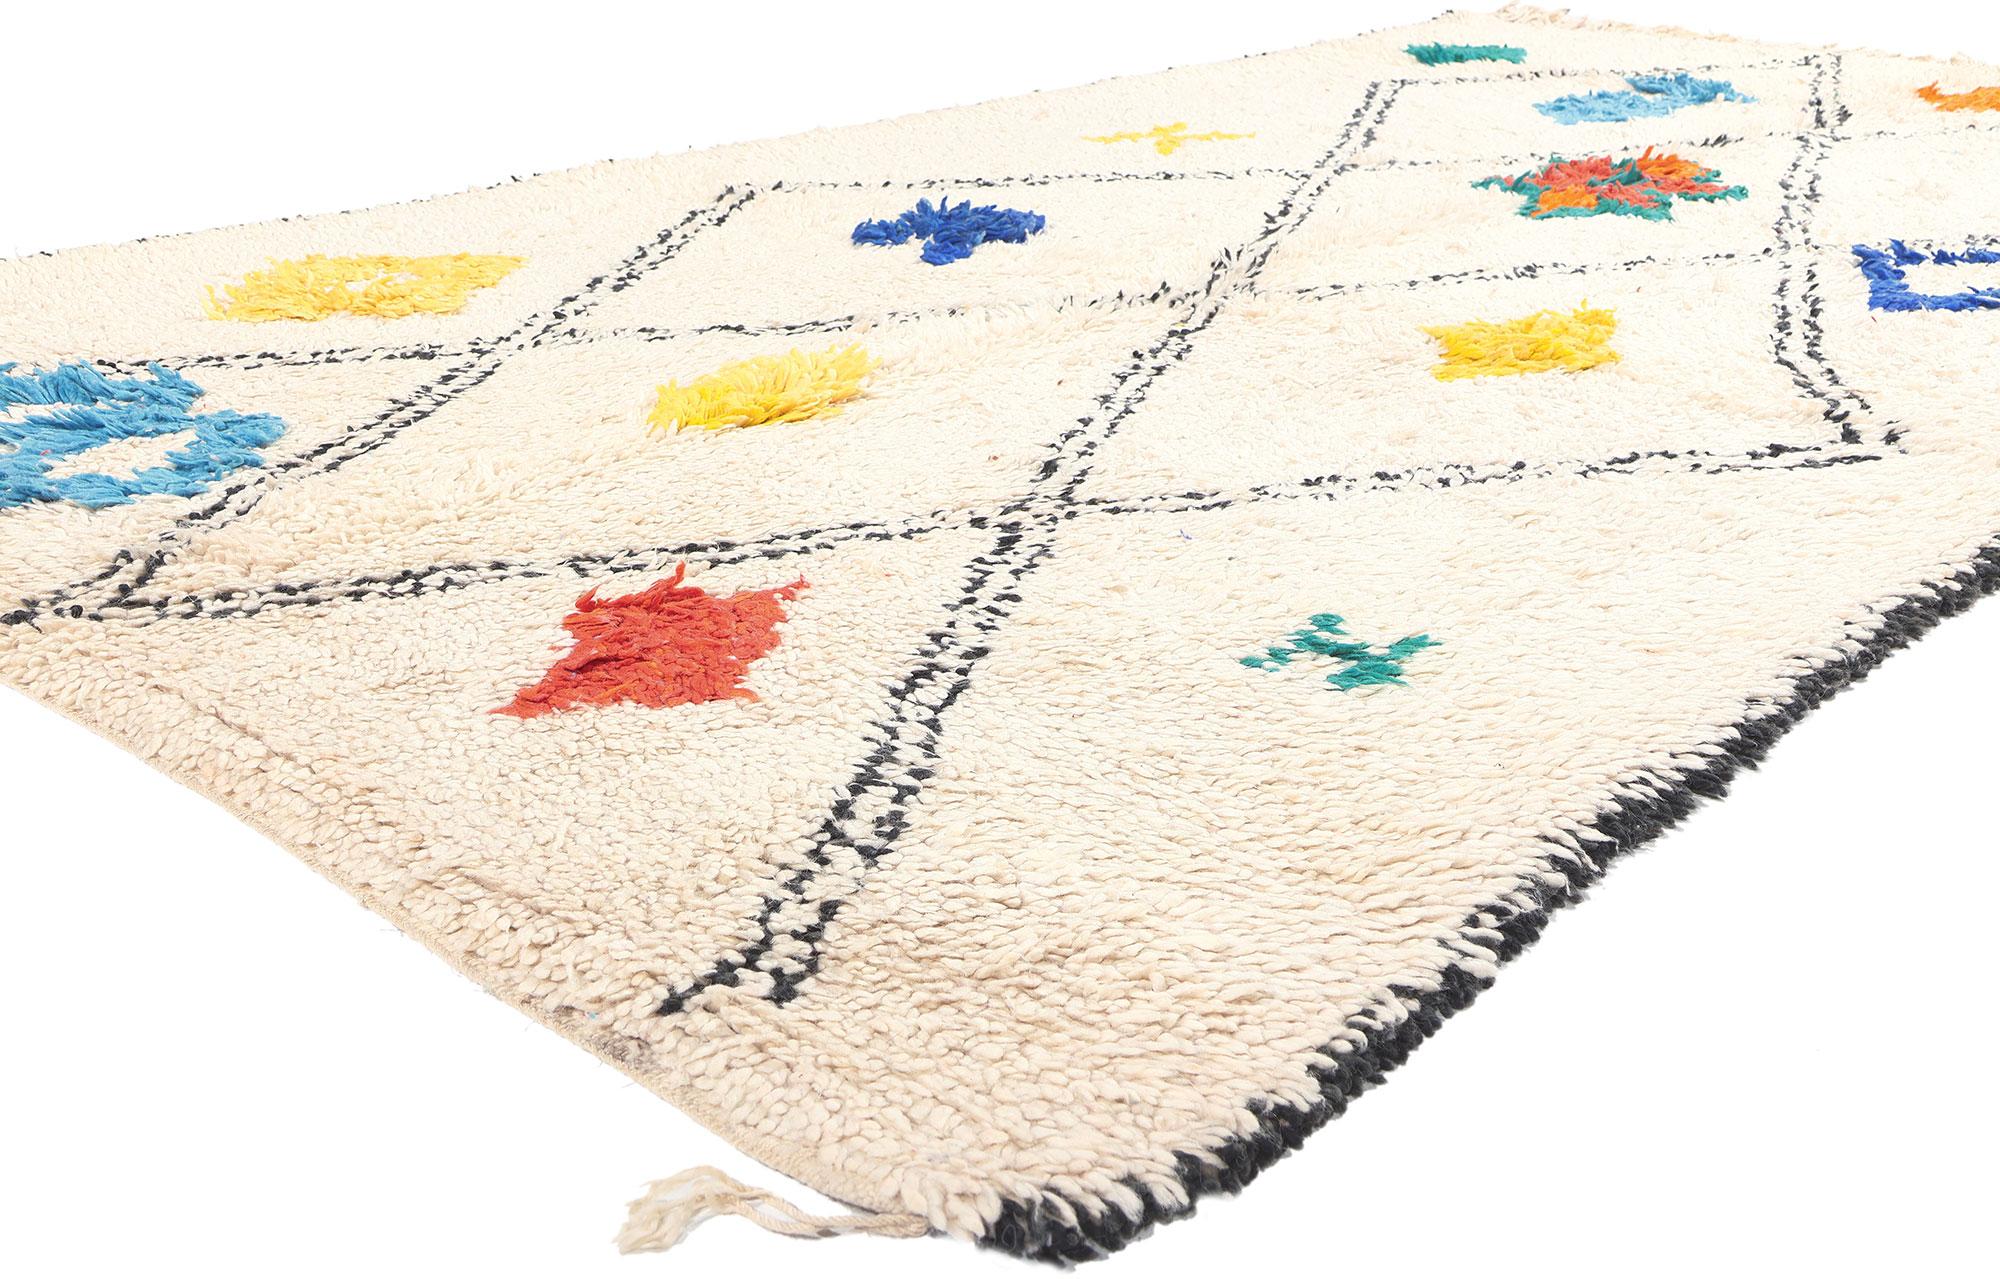 21040 Colorful Moroccan Azilal Rug, 05'09 x 09'10.
Embark on a mystical journey into the heart of tradition with this hand-knotted wool Berber Moroccan Azilal rug, where the tribal women of the Azilal region weave enchanting tales of life's